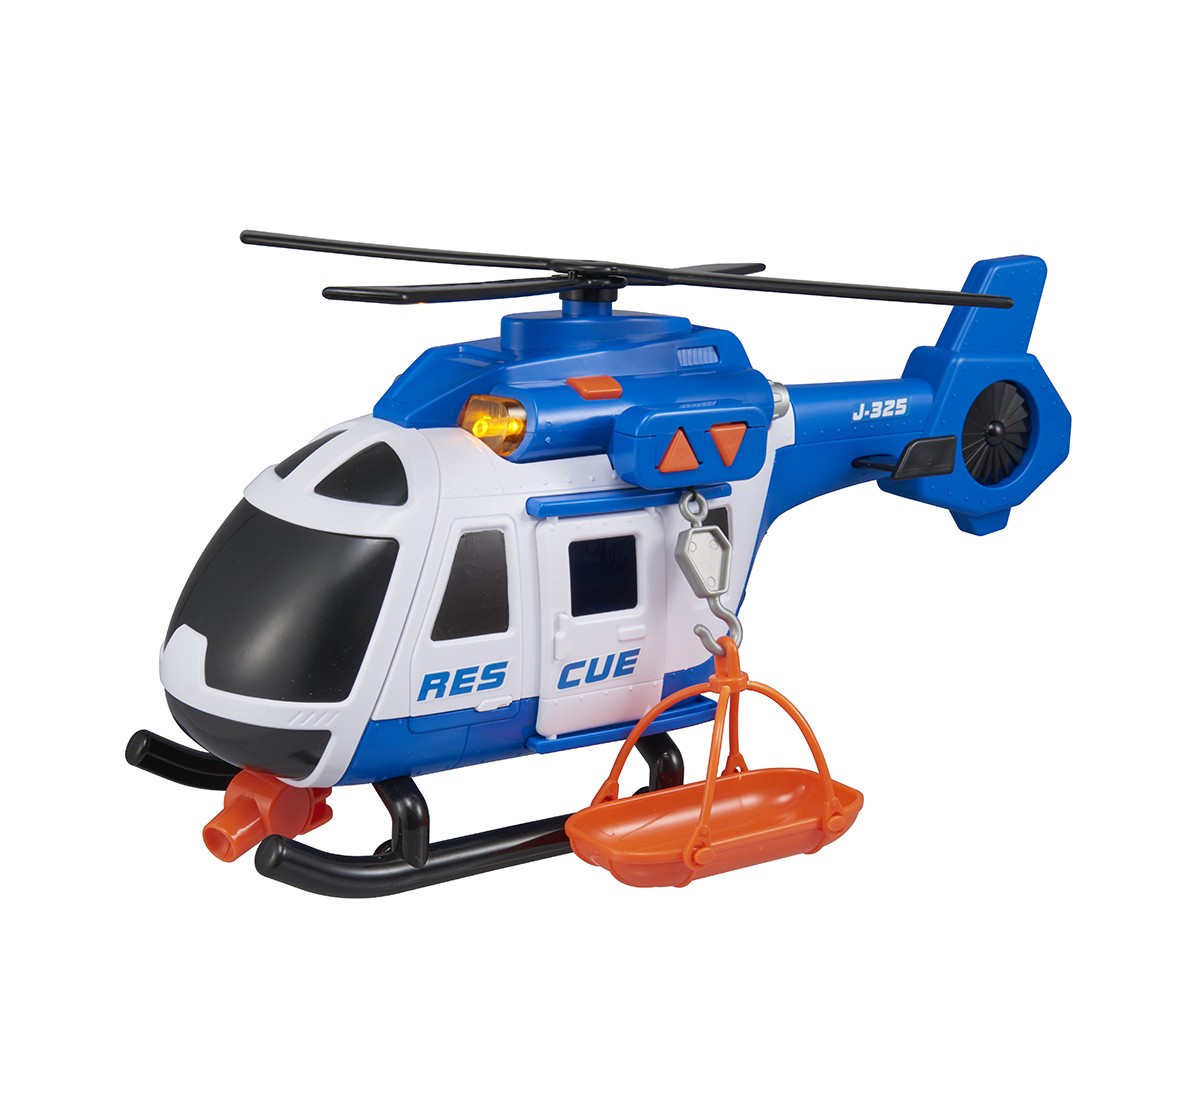 Ralleyz Light And Sound Helicopter-Large Vehicles for Kids age 4Y+ 